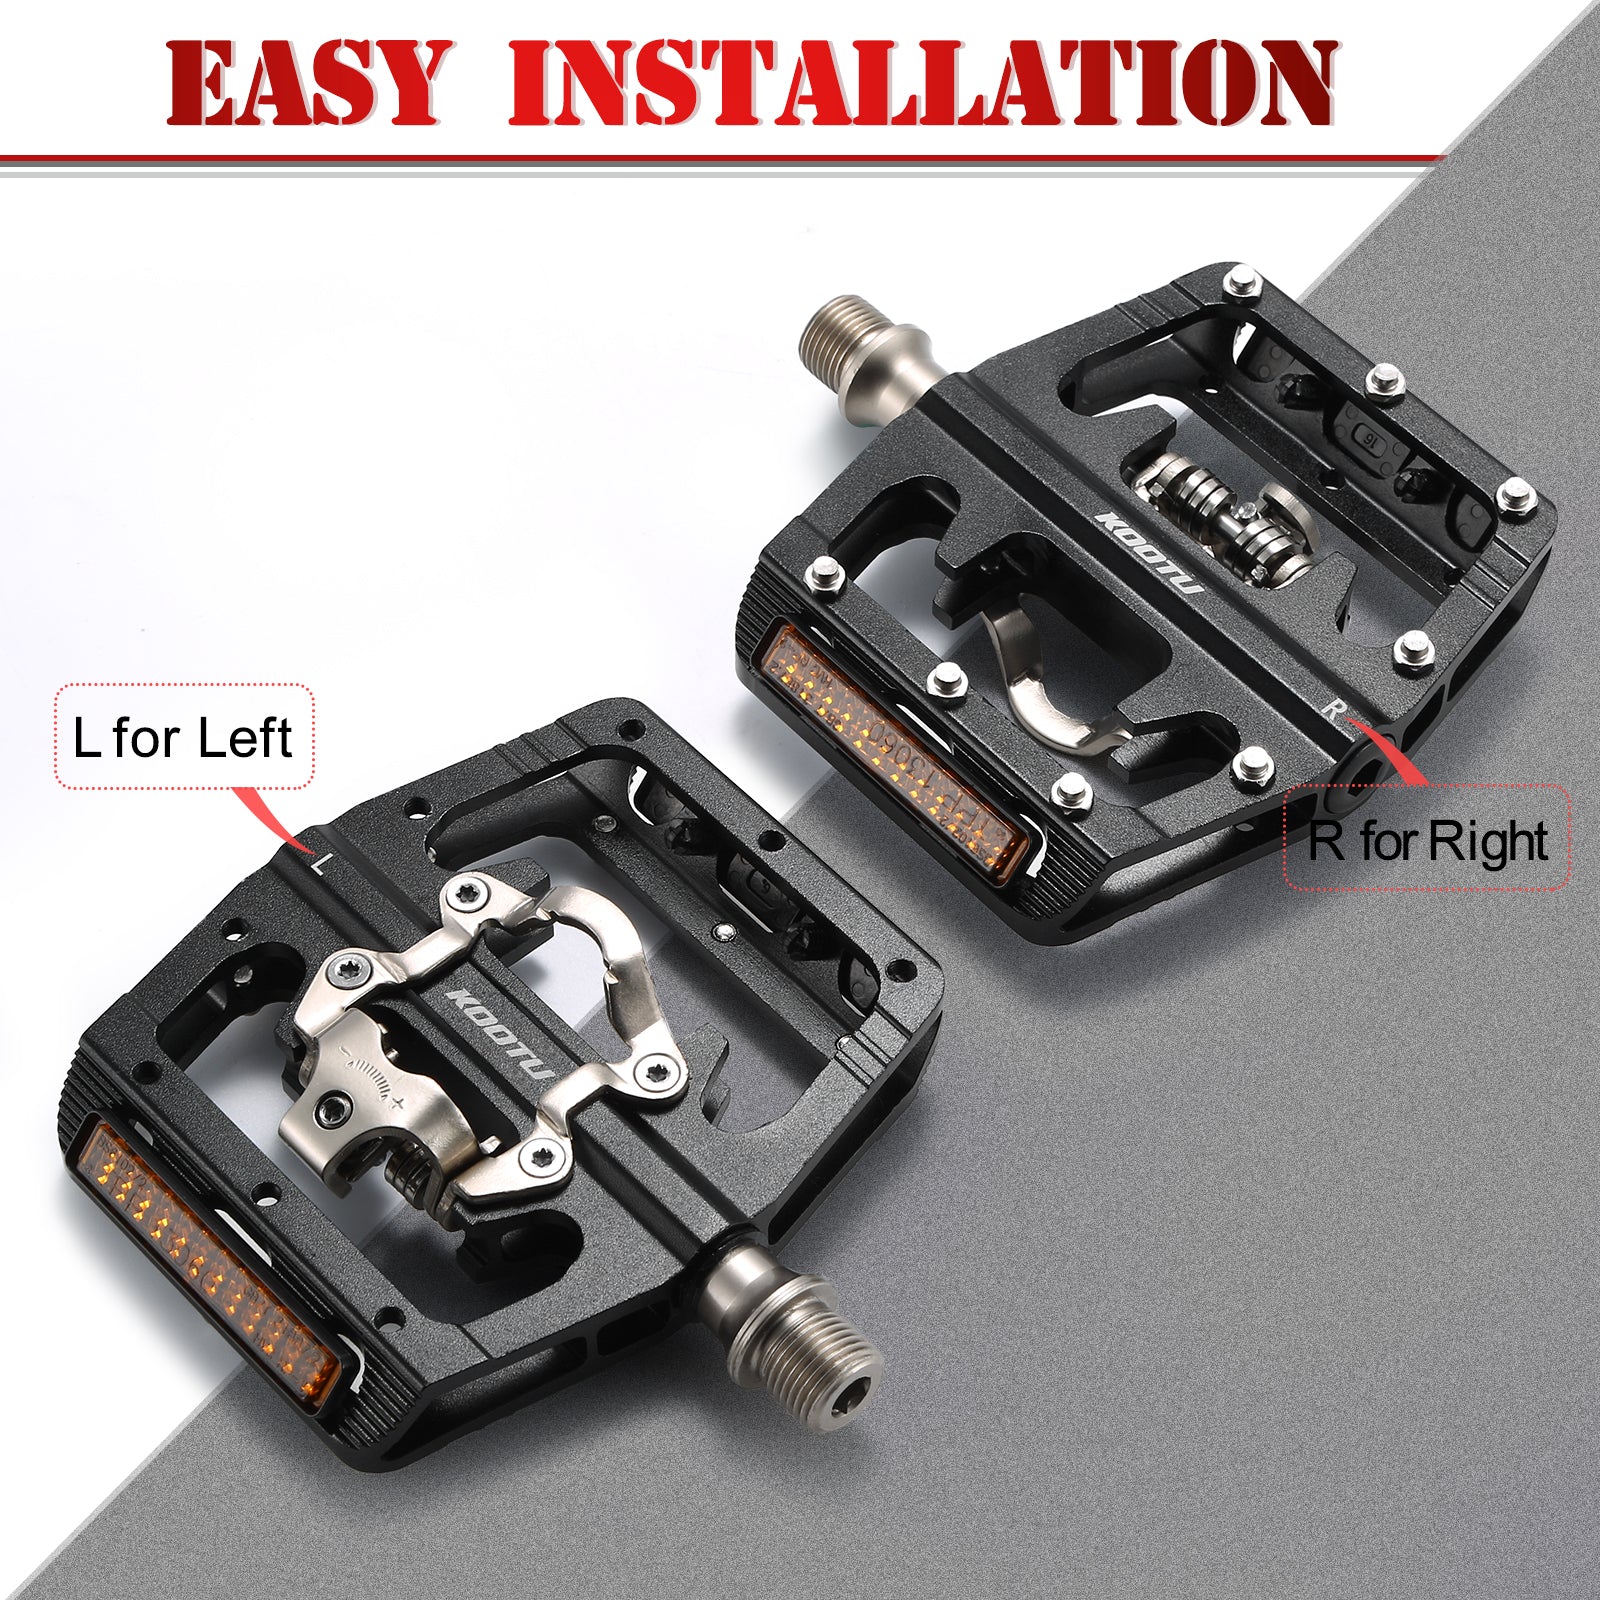 KOOTU mountain bike pedals easy to install